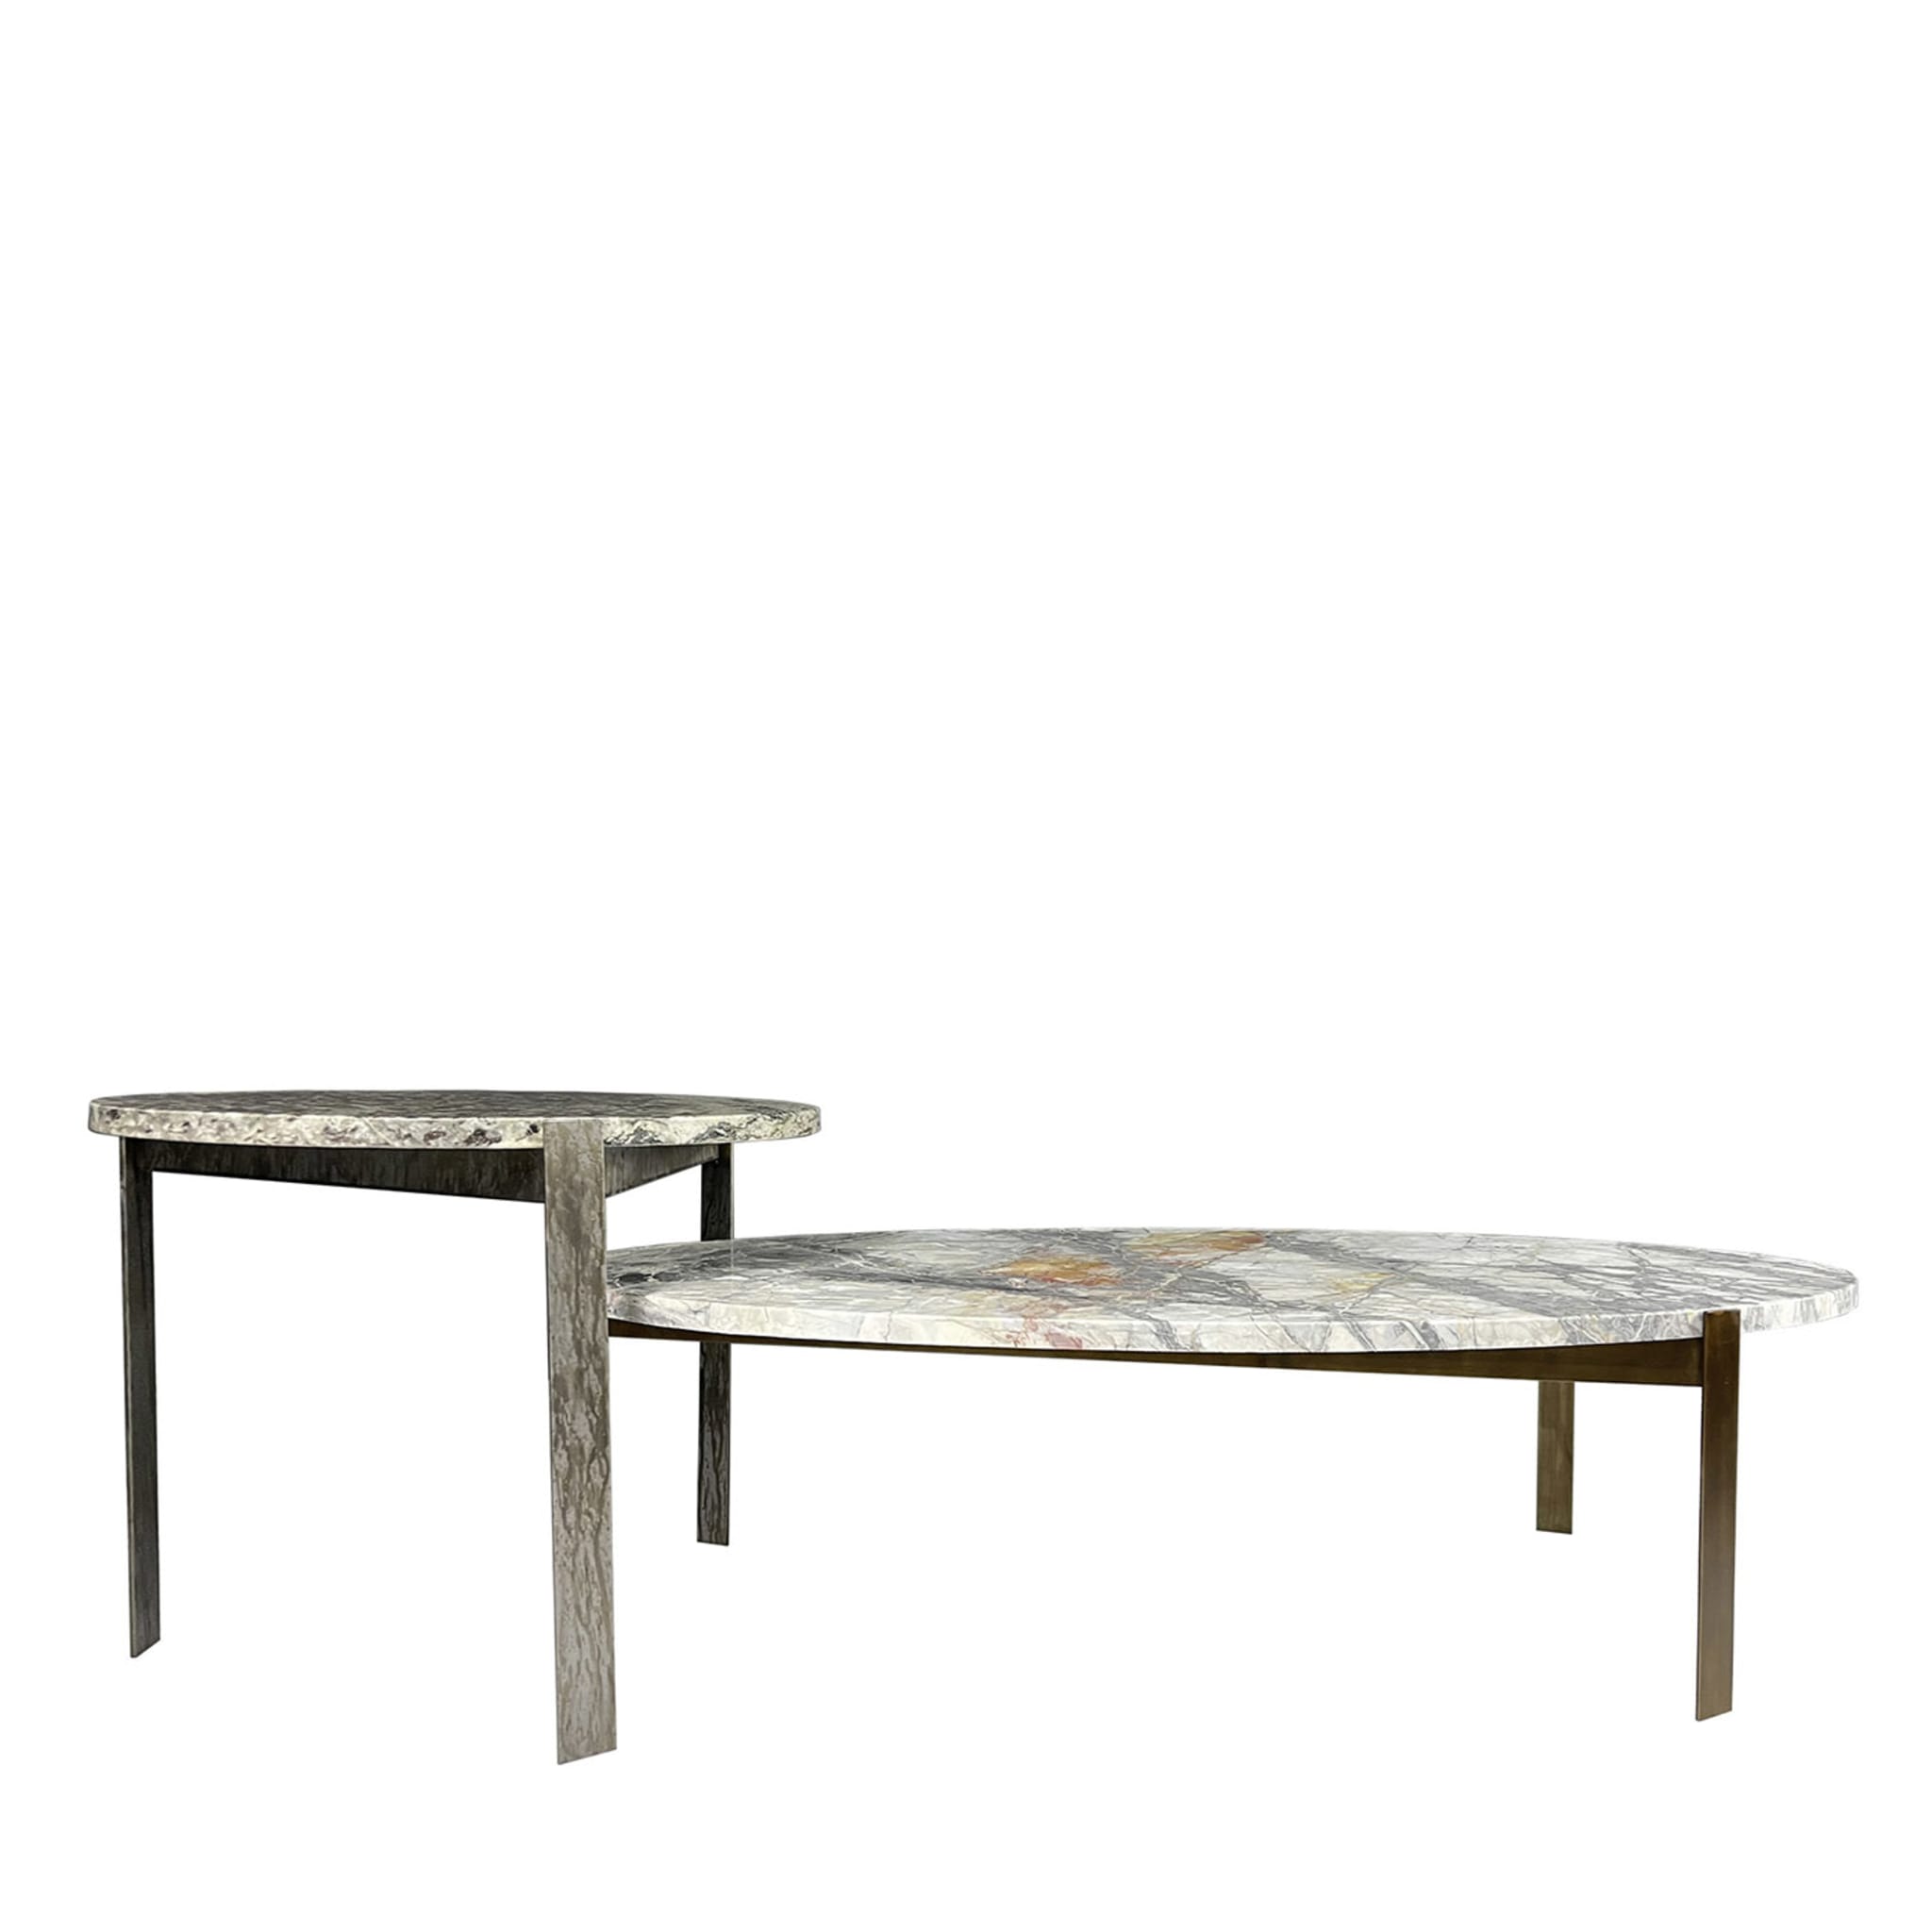 Eneolitica Blend Set of Enry + Forrest Coffee Tables - Main view